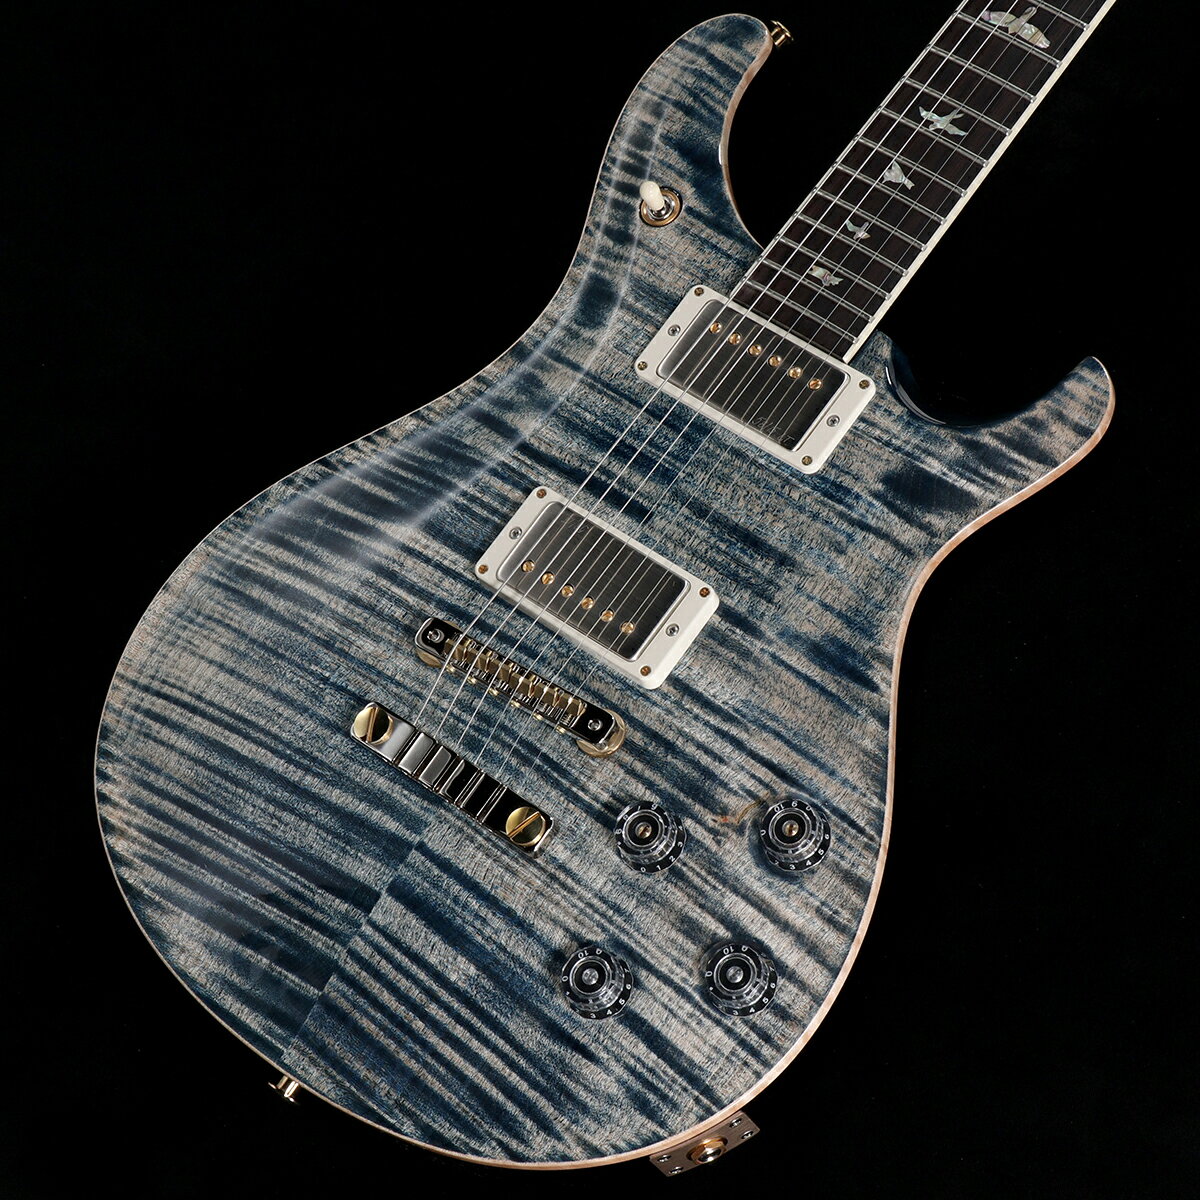 Paul Reed Smith (PRS) / McCarty 594 10Top Faded Whale Blue Pattern Vintage Neck (重量:3.64kg)【S/N 23 0370826】【渋谷店】 ポールリードスミス マッカーティ 594 パターンヴィンテージネック 10トップ ギター